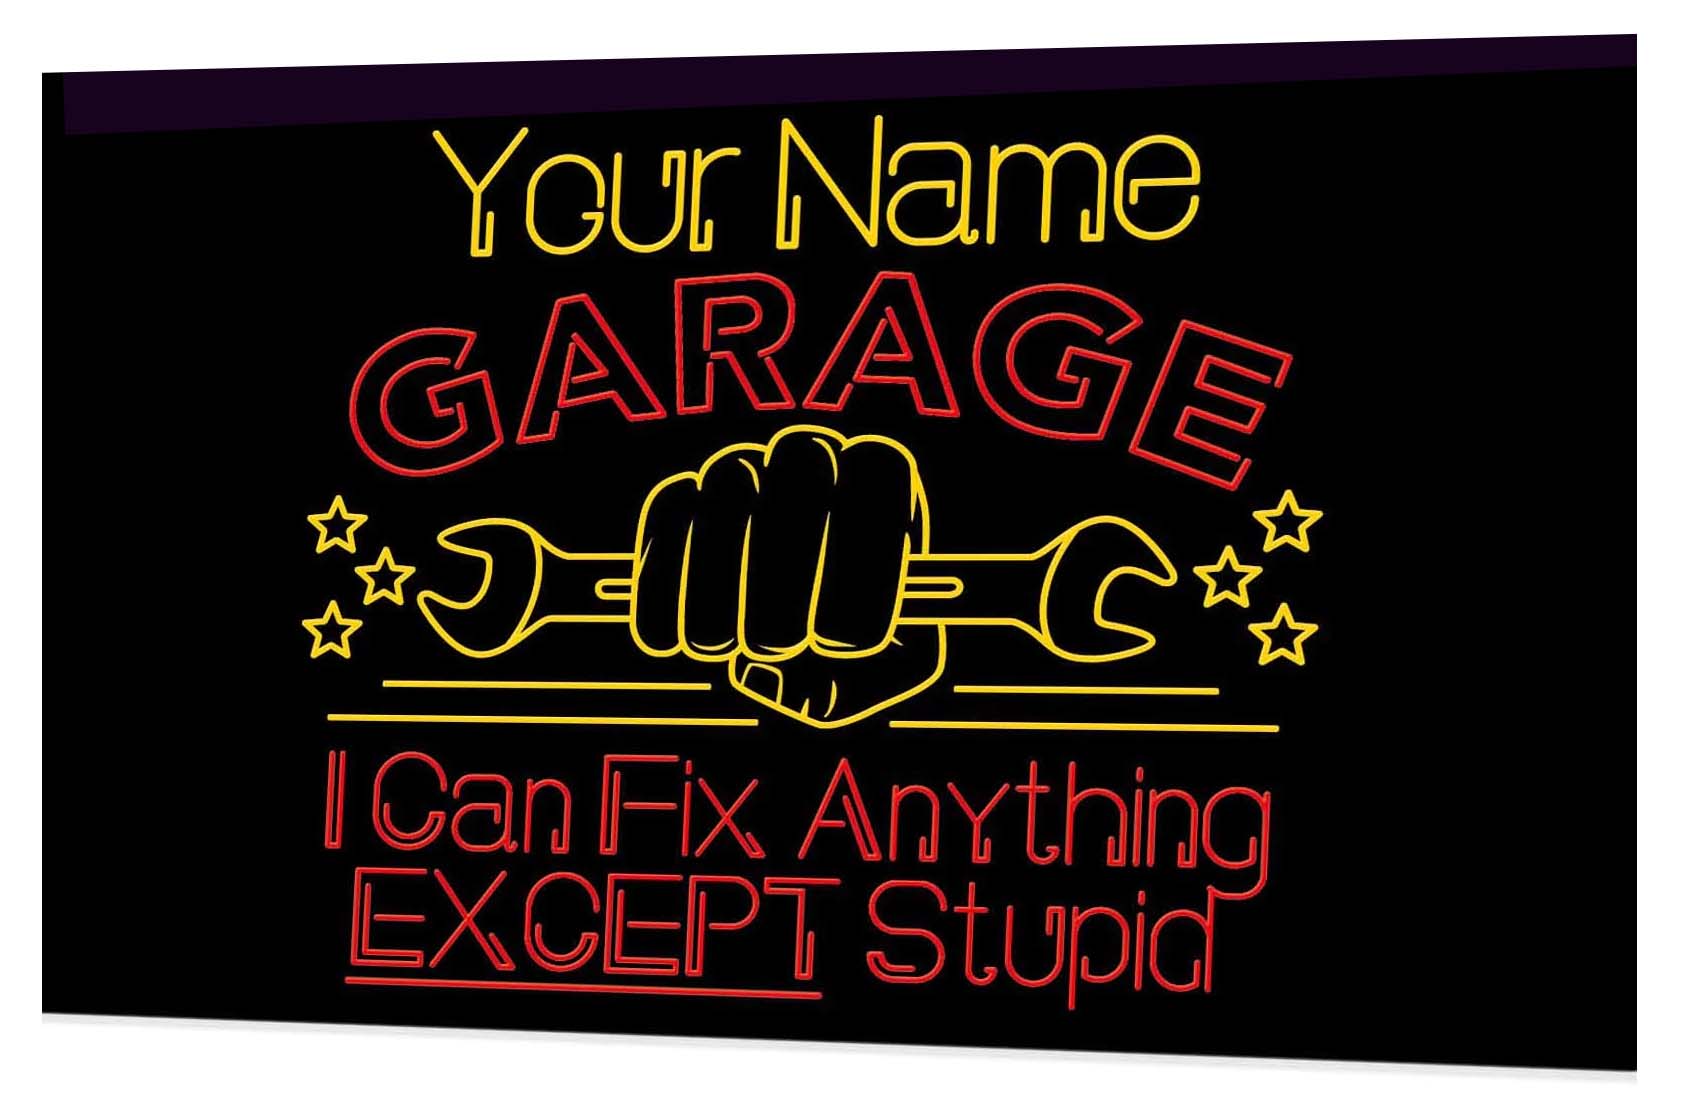  I can fix anything except stupid neon sign - yellow red